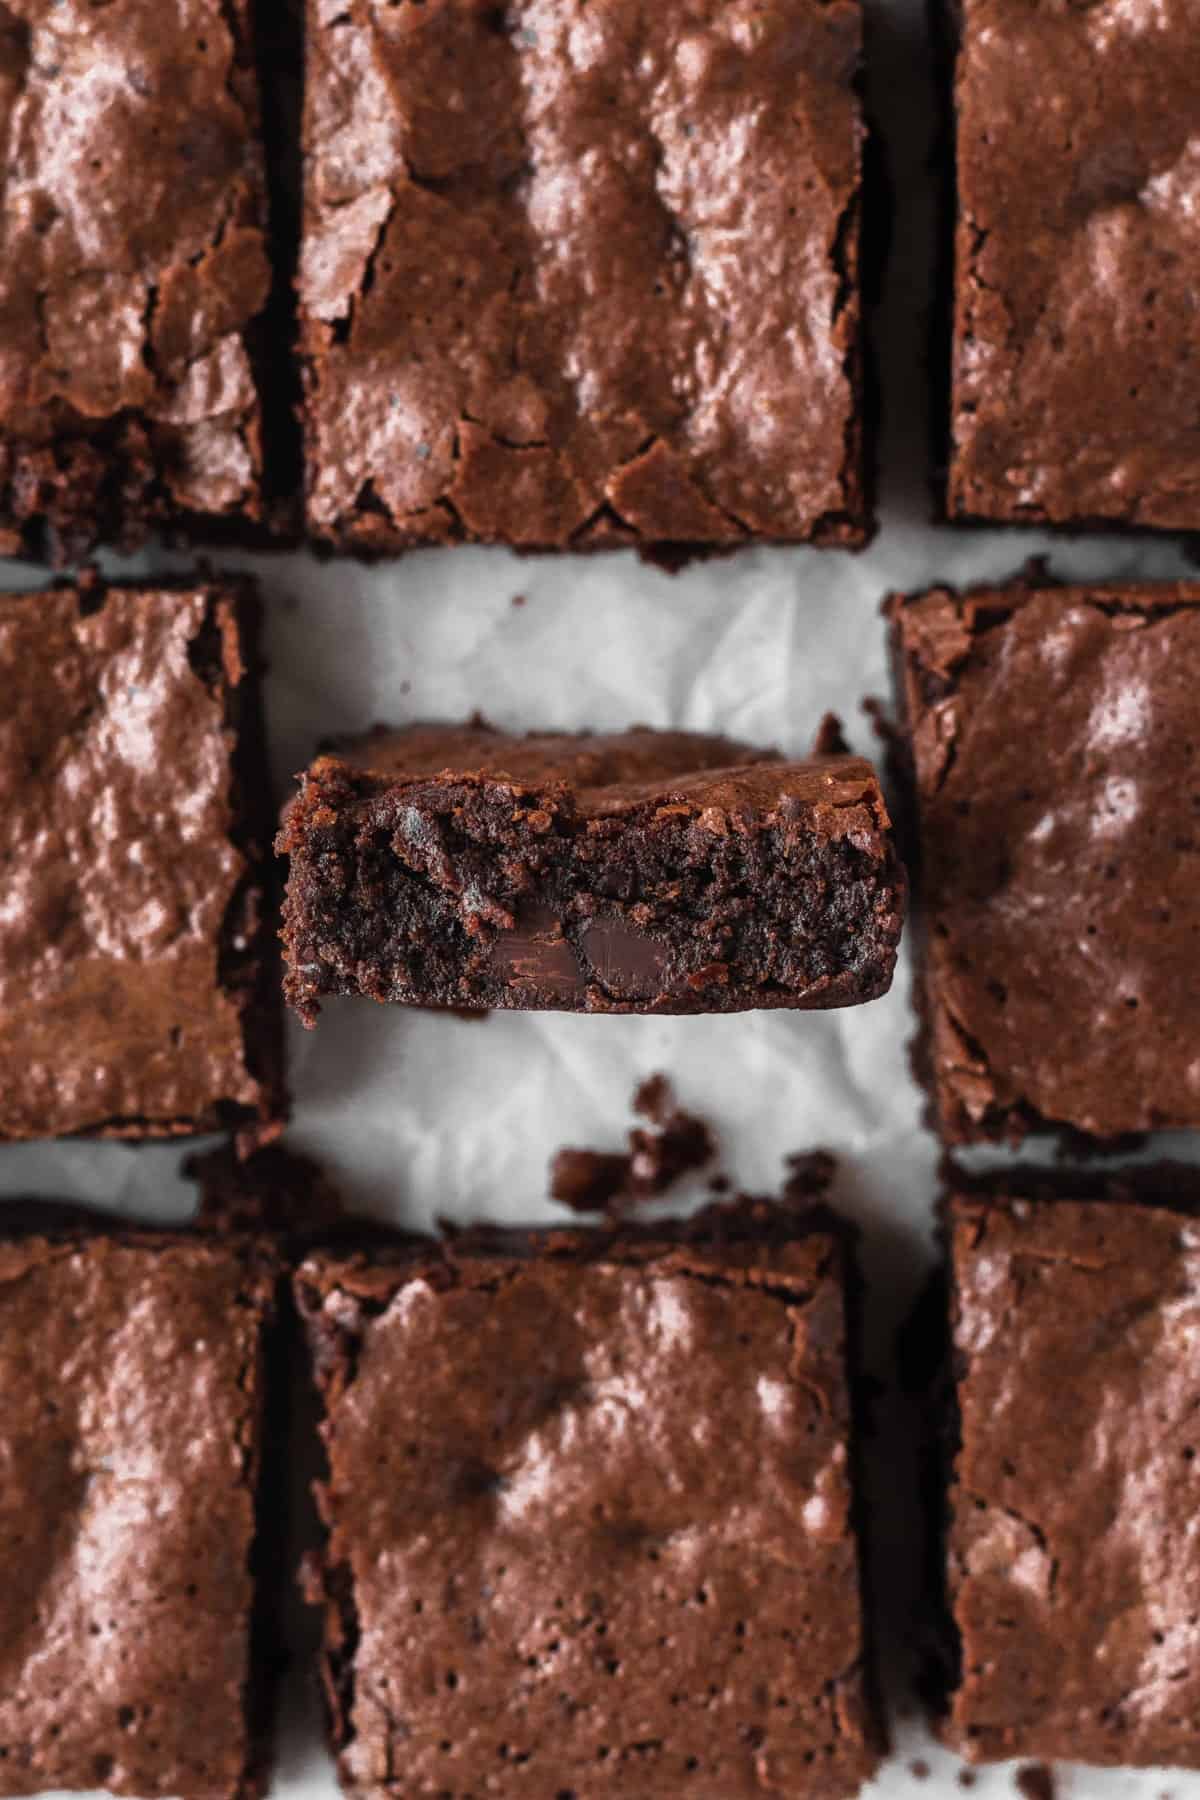 Gluten-free brownies cut into squares with the middle one turned onto its side edge to show the texture.